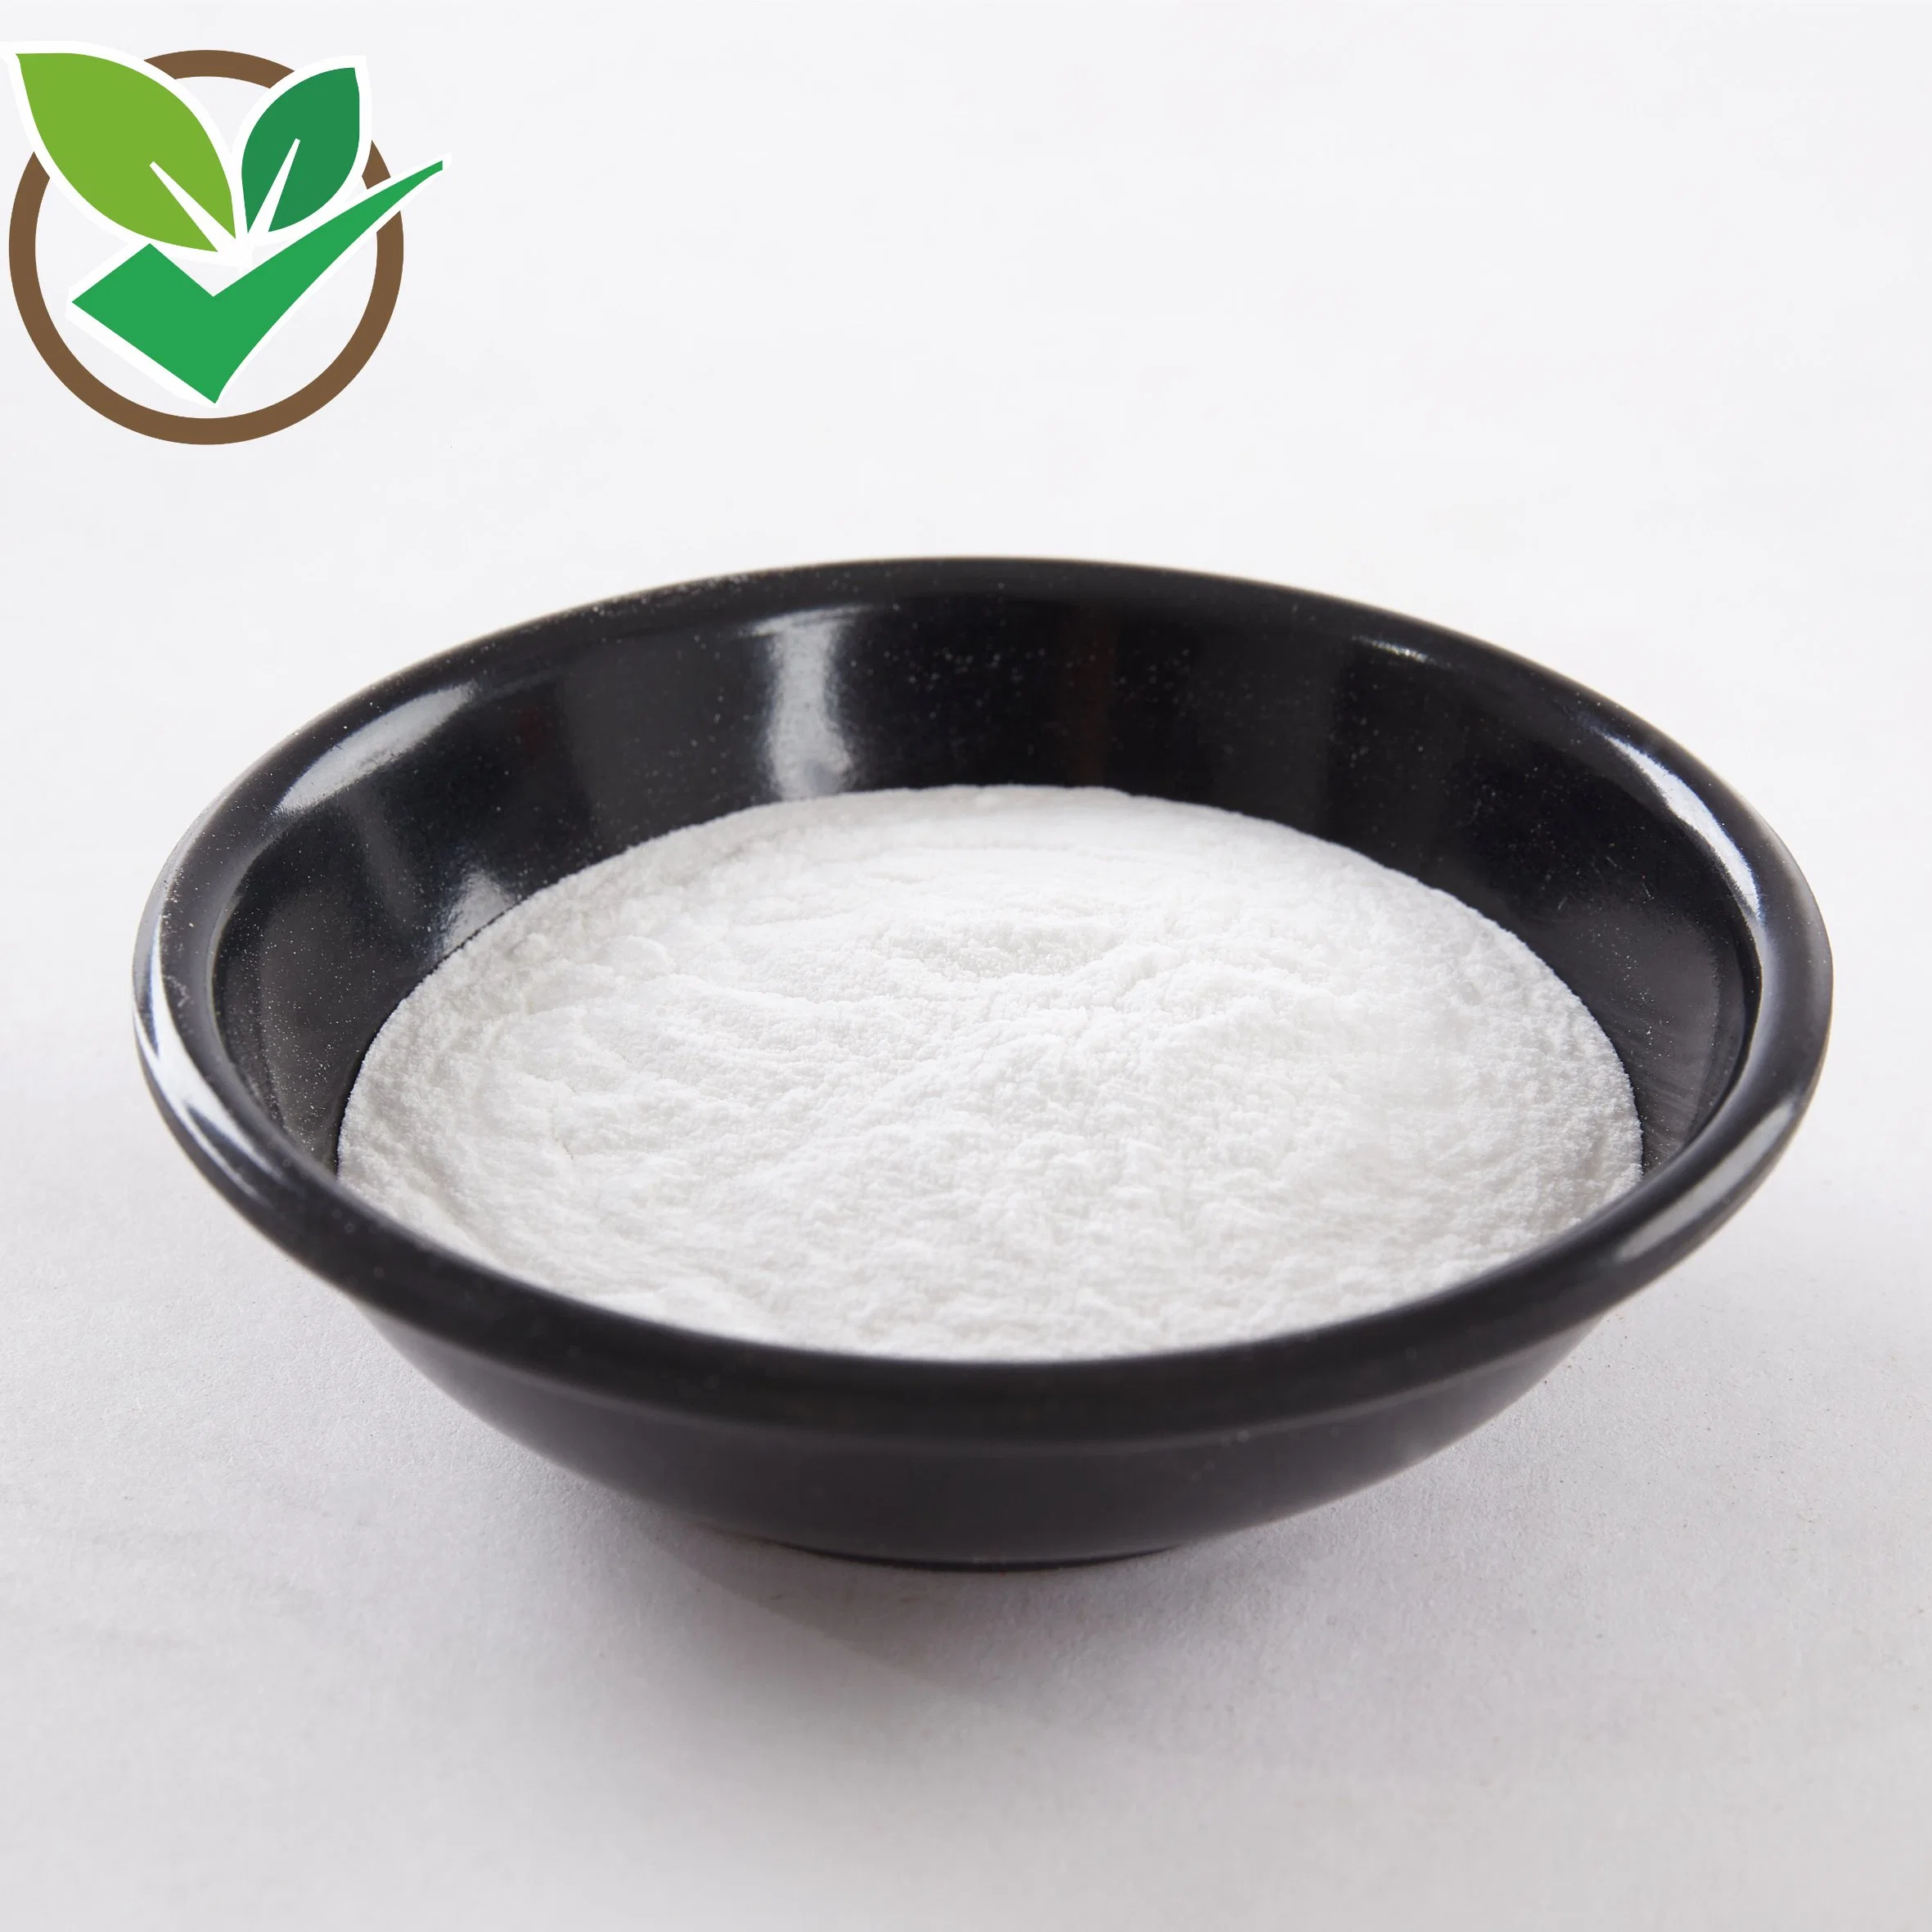 100% Natural Maral Root Extract 20% Ecdysterone